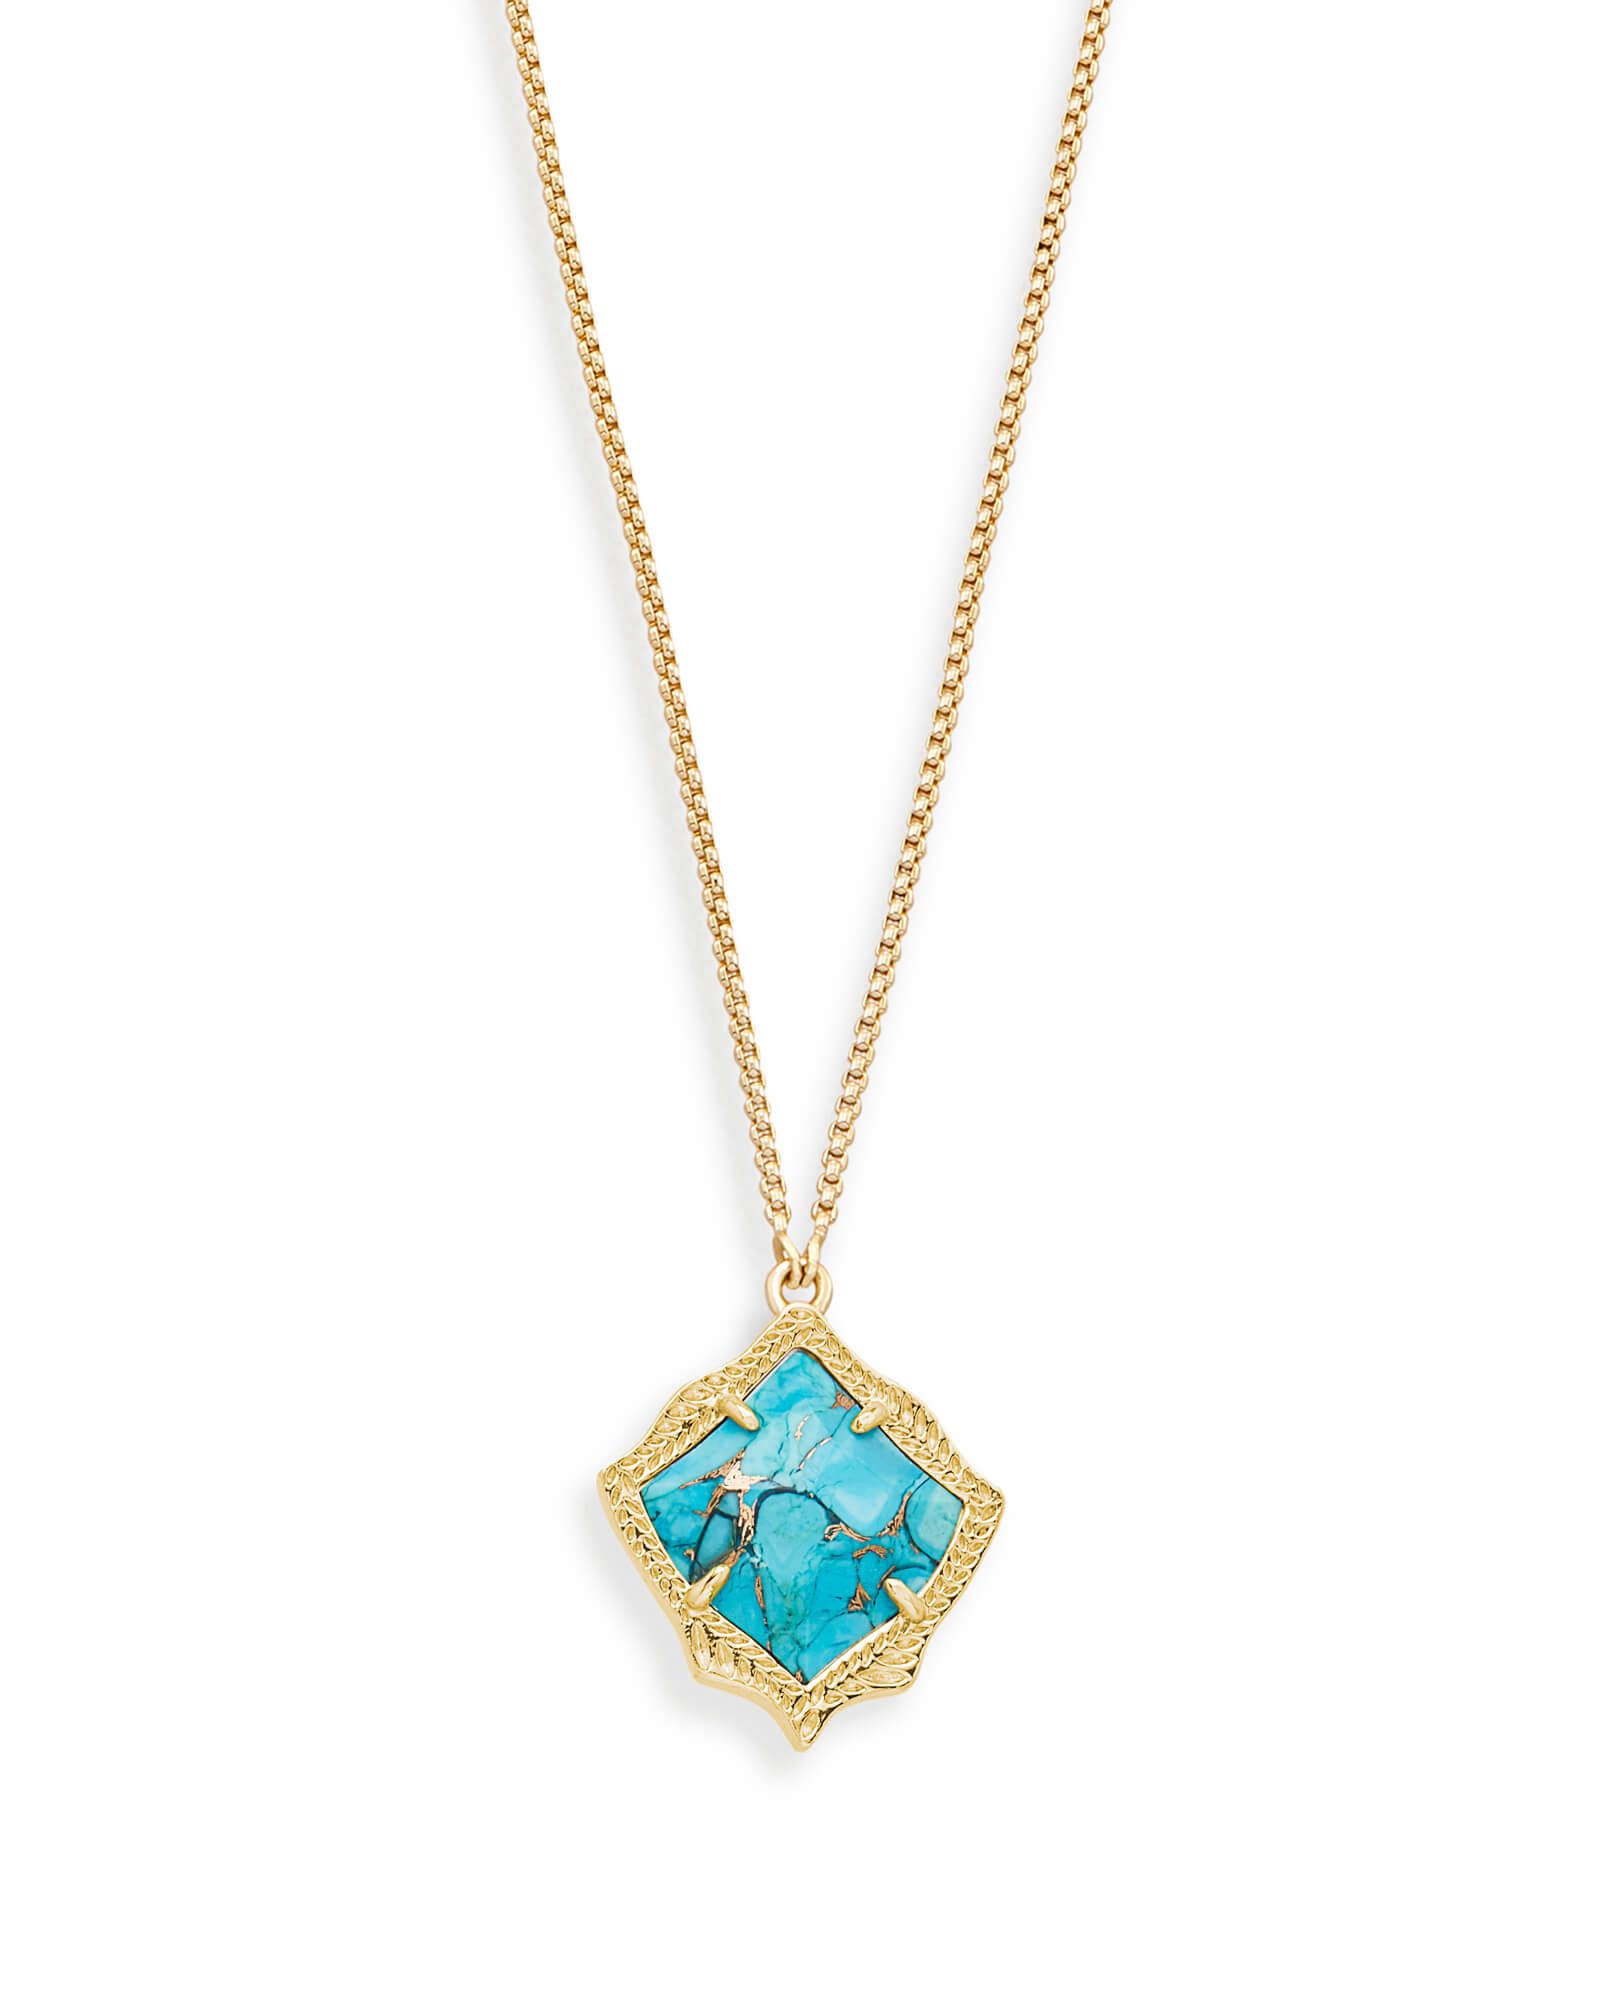 Kacey Long Pendant Necklace in Bronze Veined Turquoise | Kendra Scott